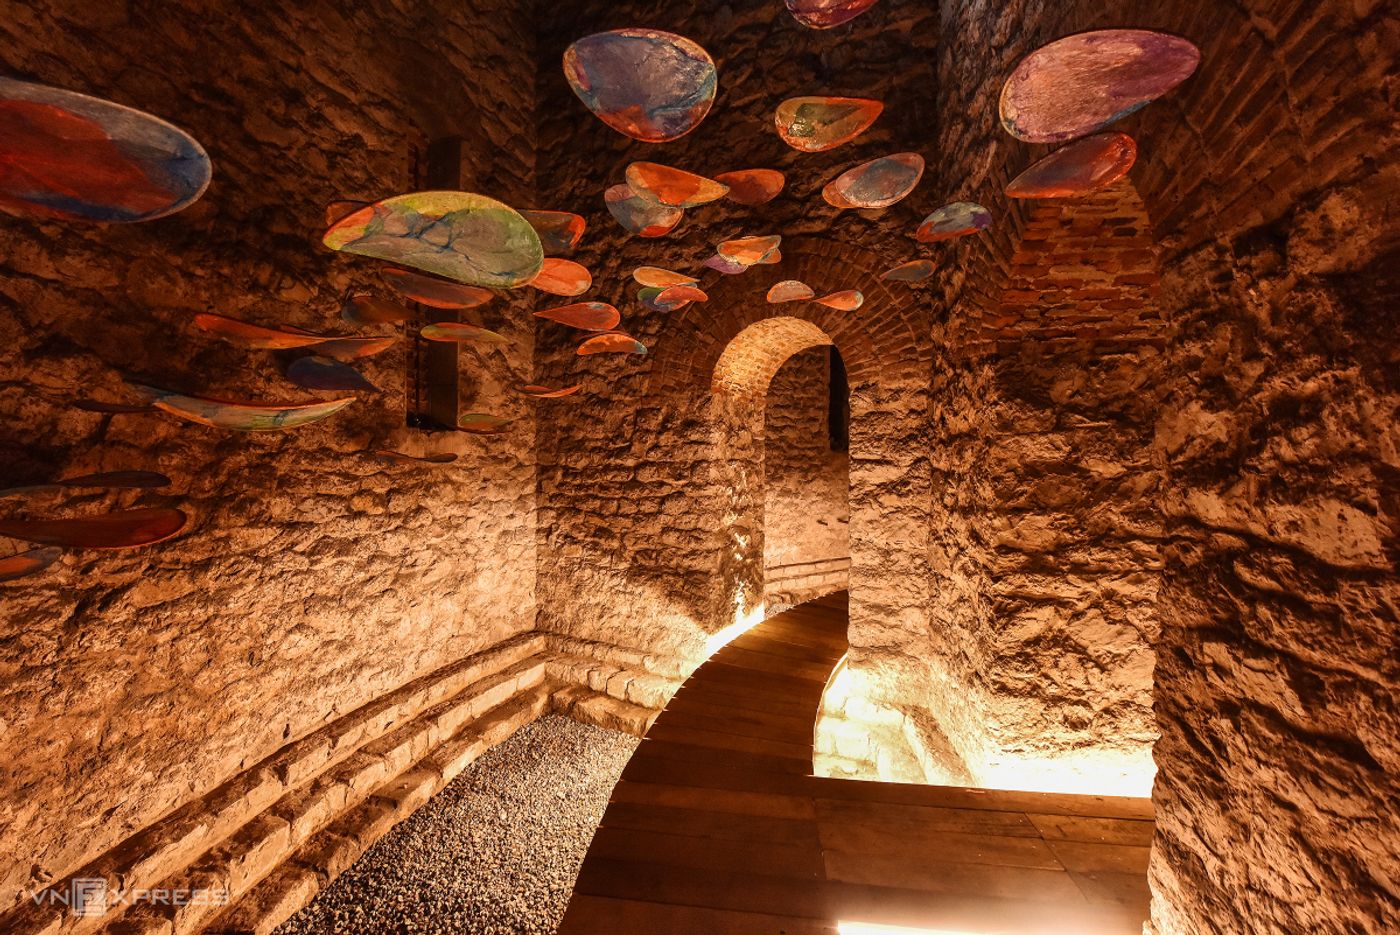 The inside of Hang Dau water tower is sparklingly decorated by skillful artisans